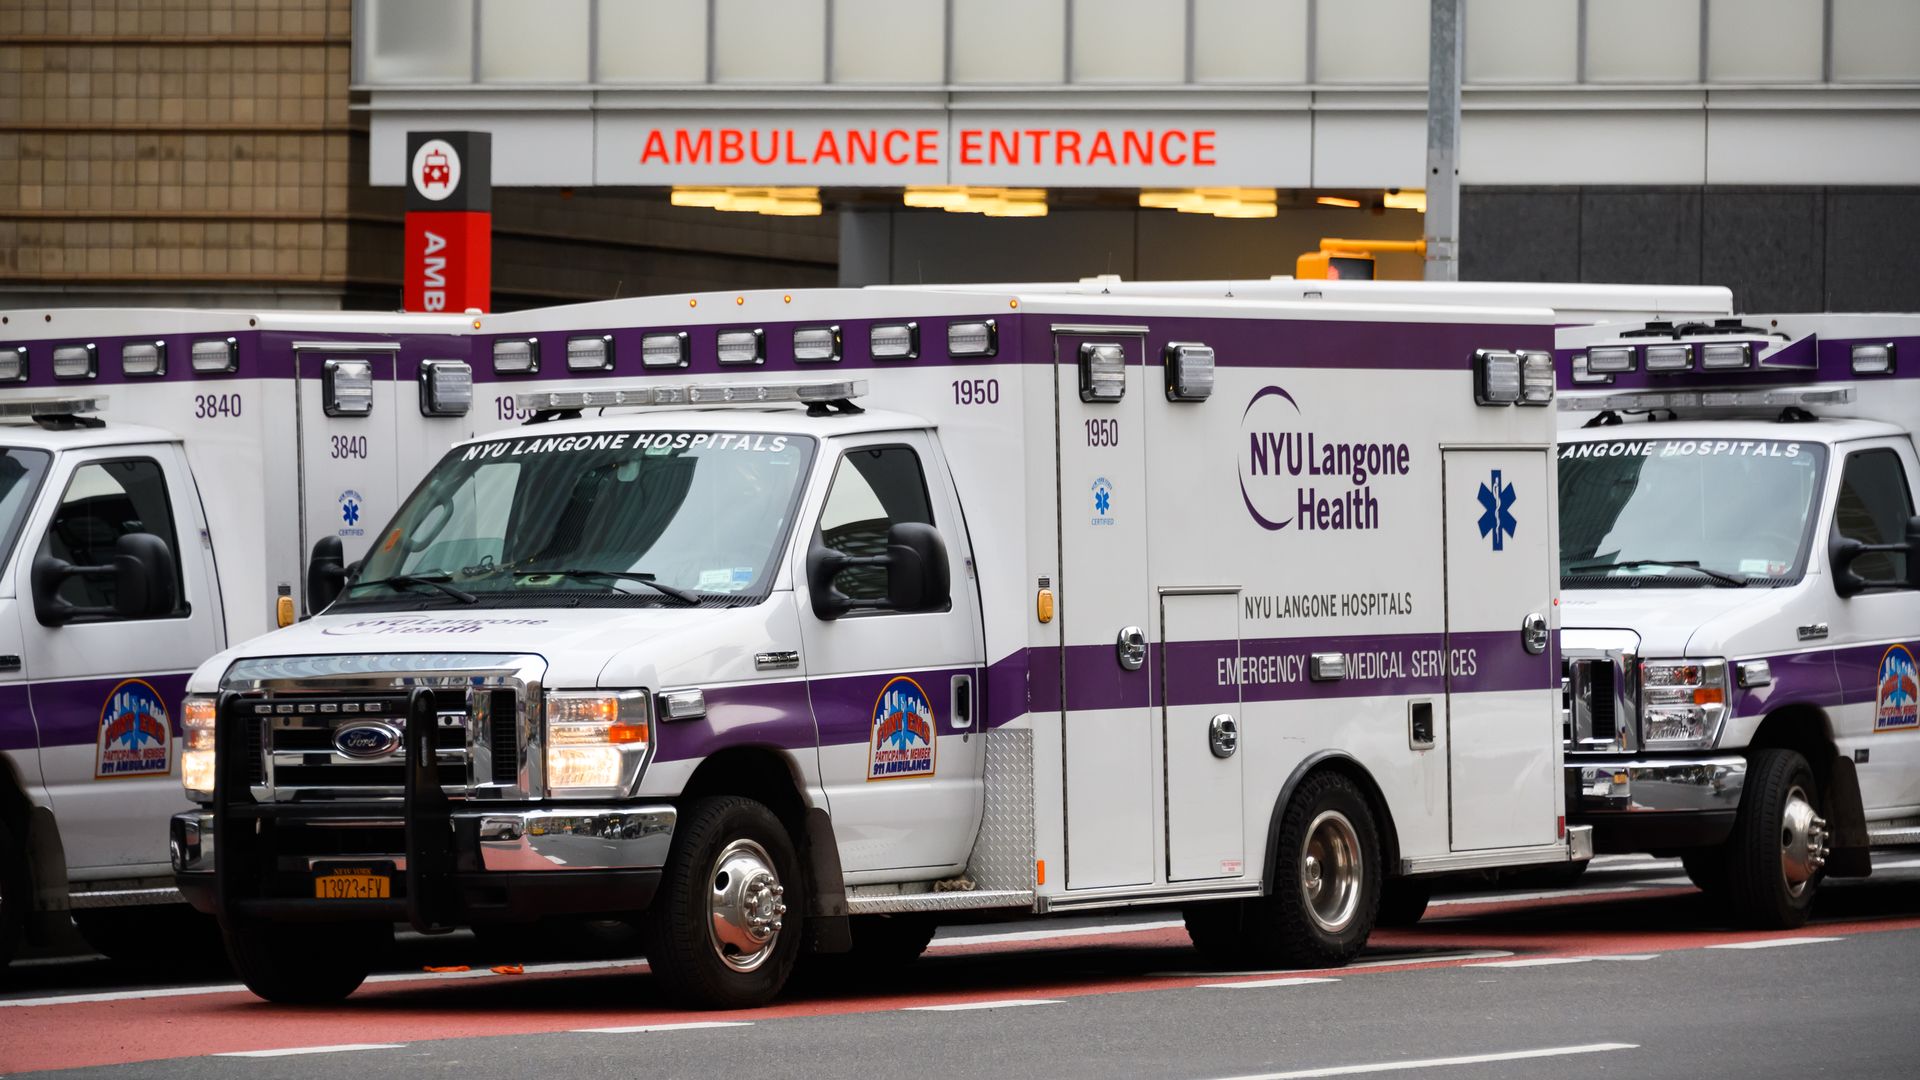 A white and purple ambulance with the NYU Langone logo and emergency room in the background.